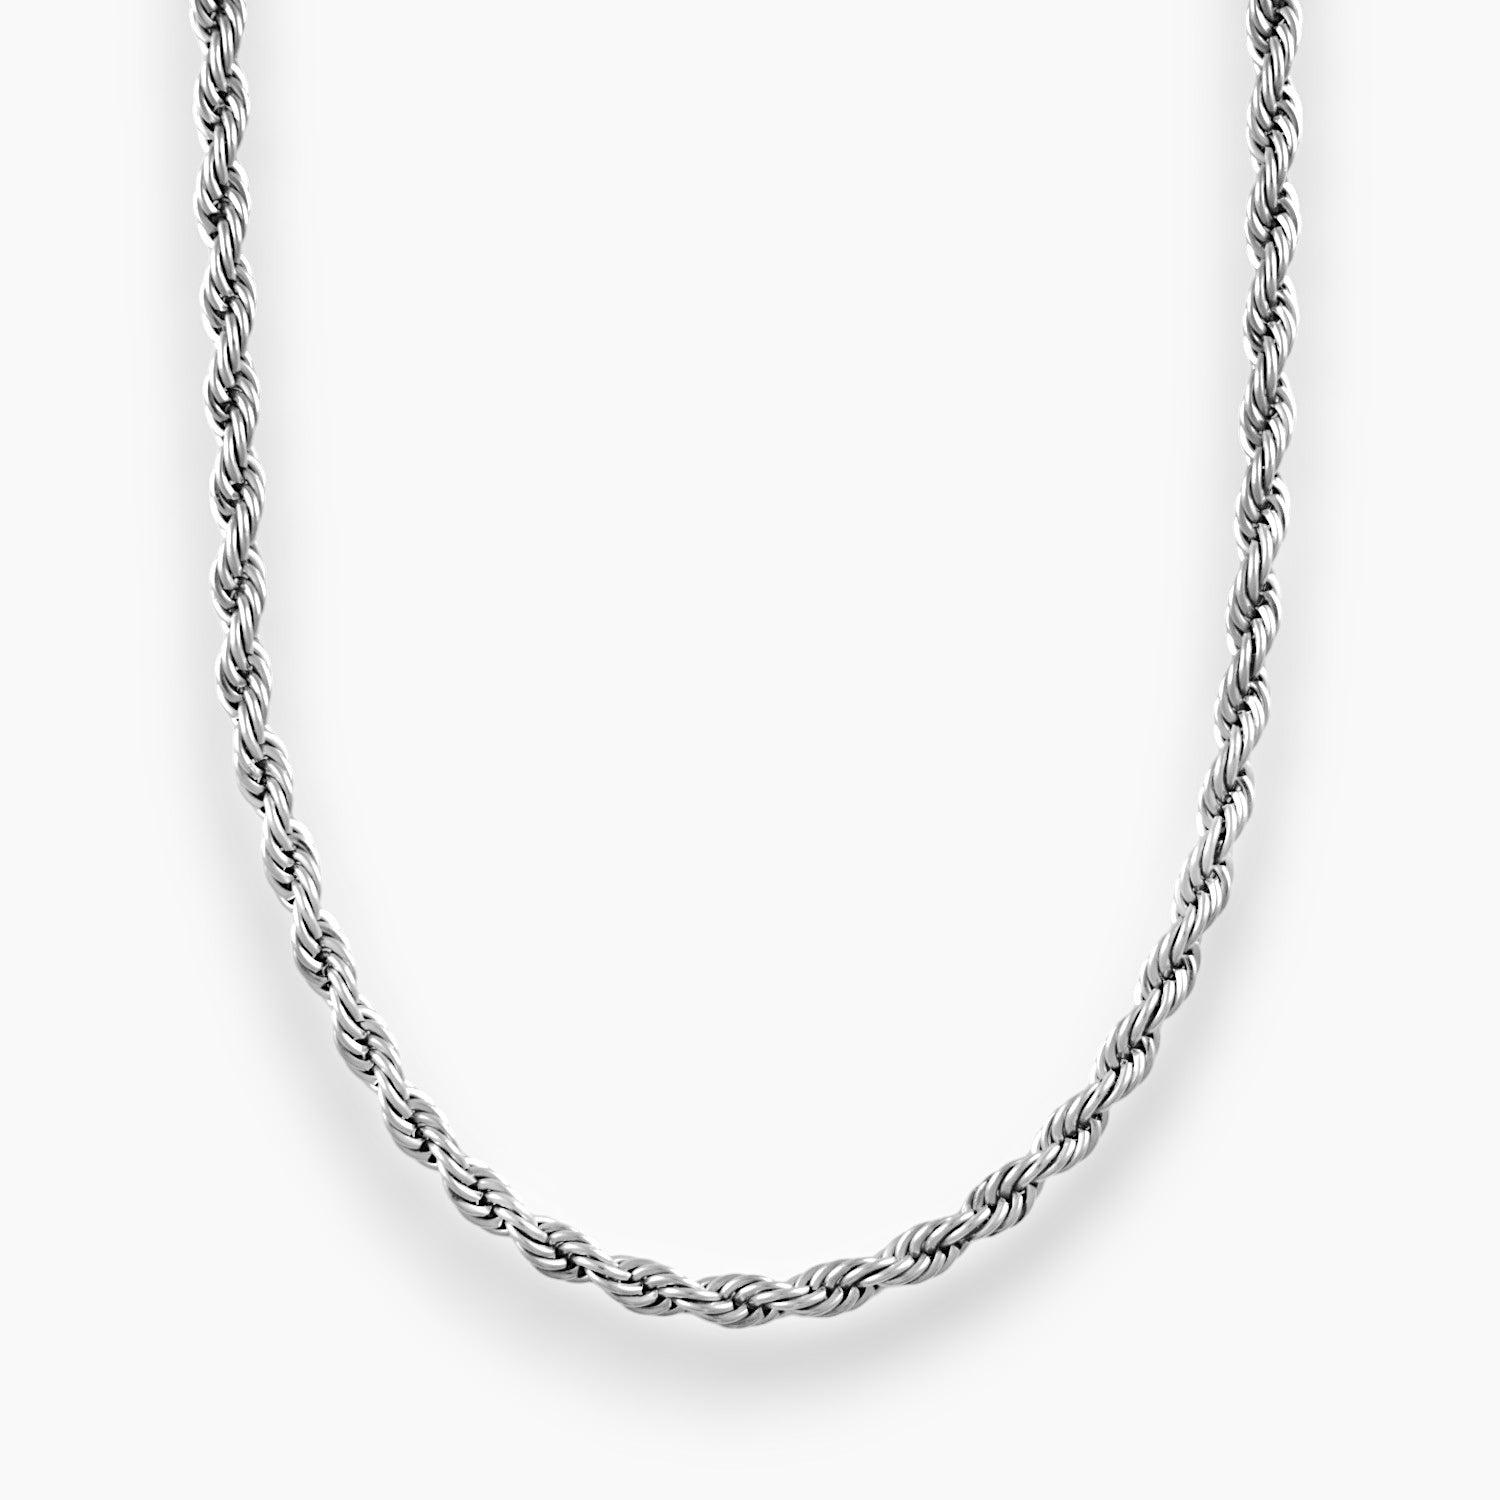 5mm silver rope chain